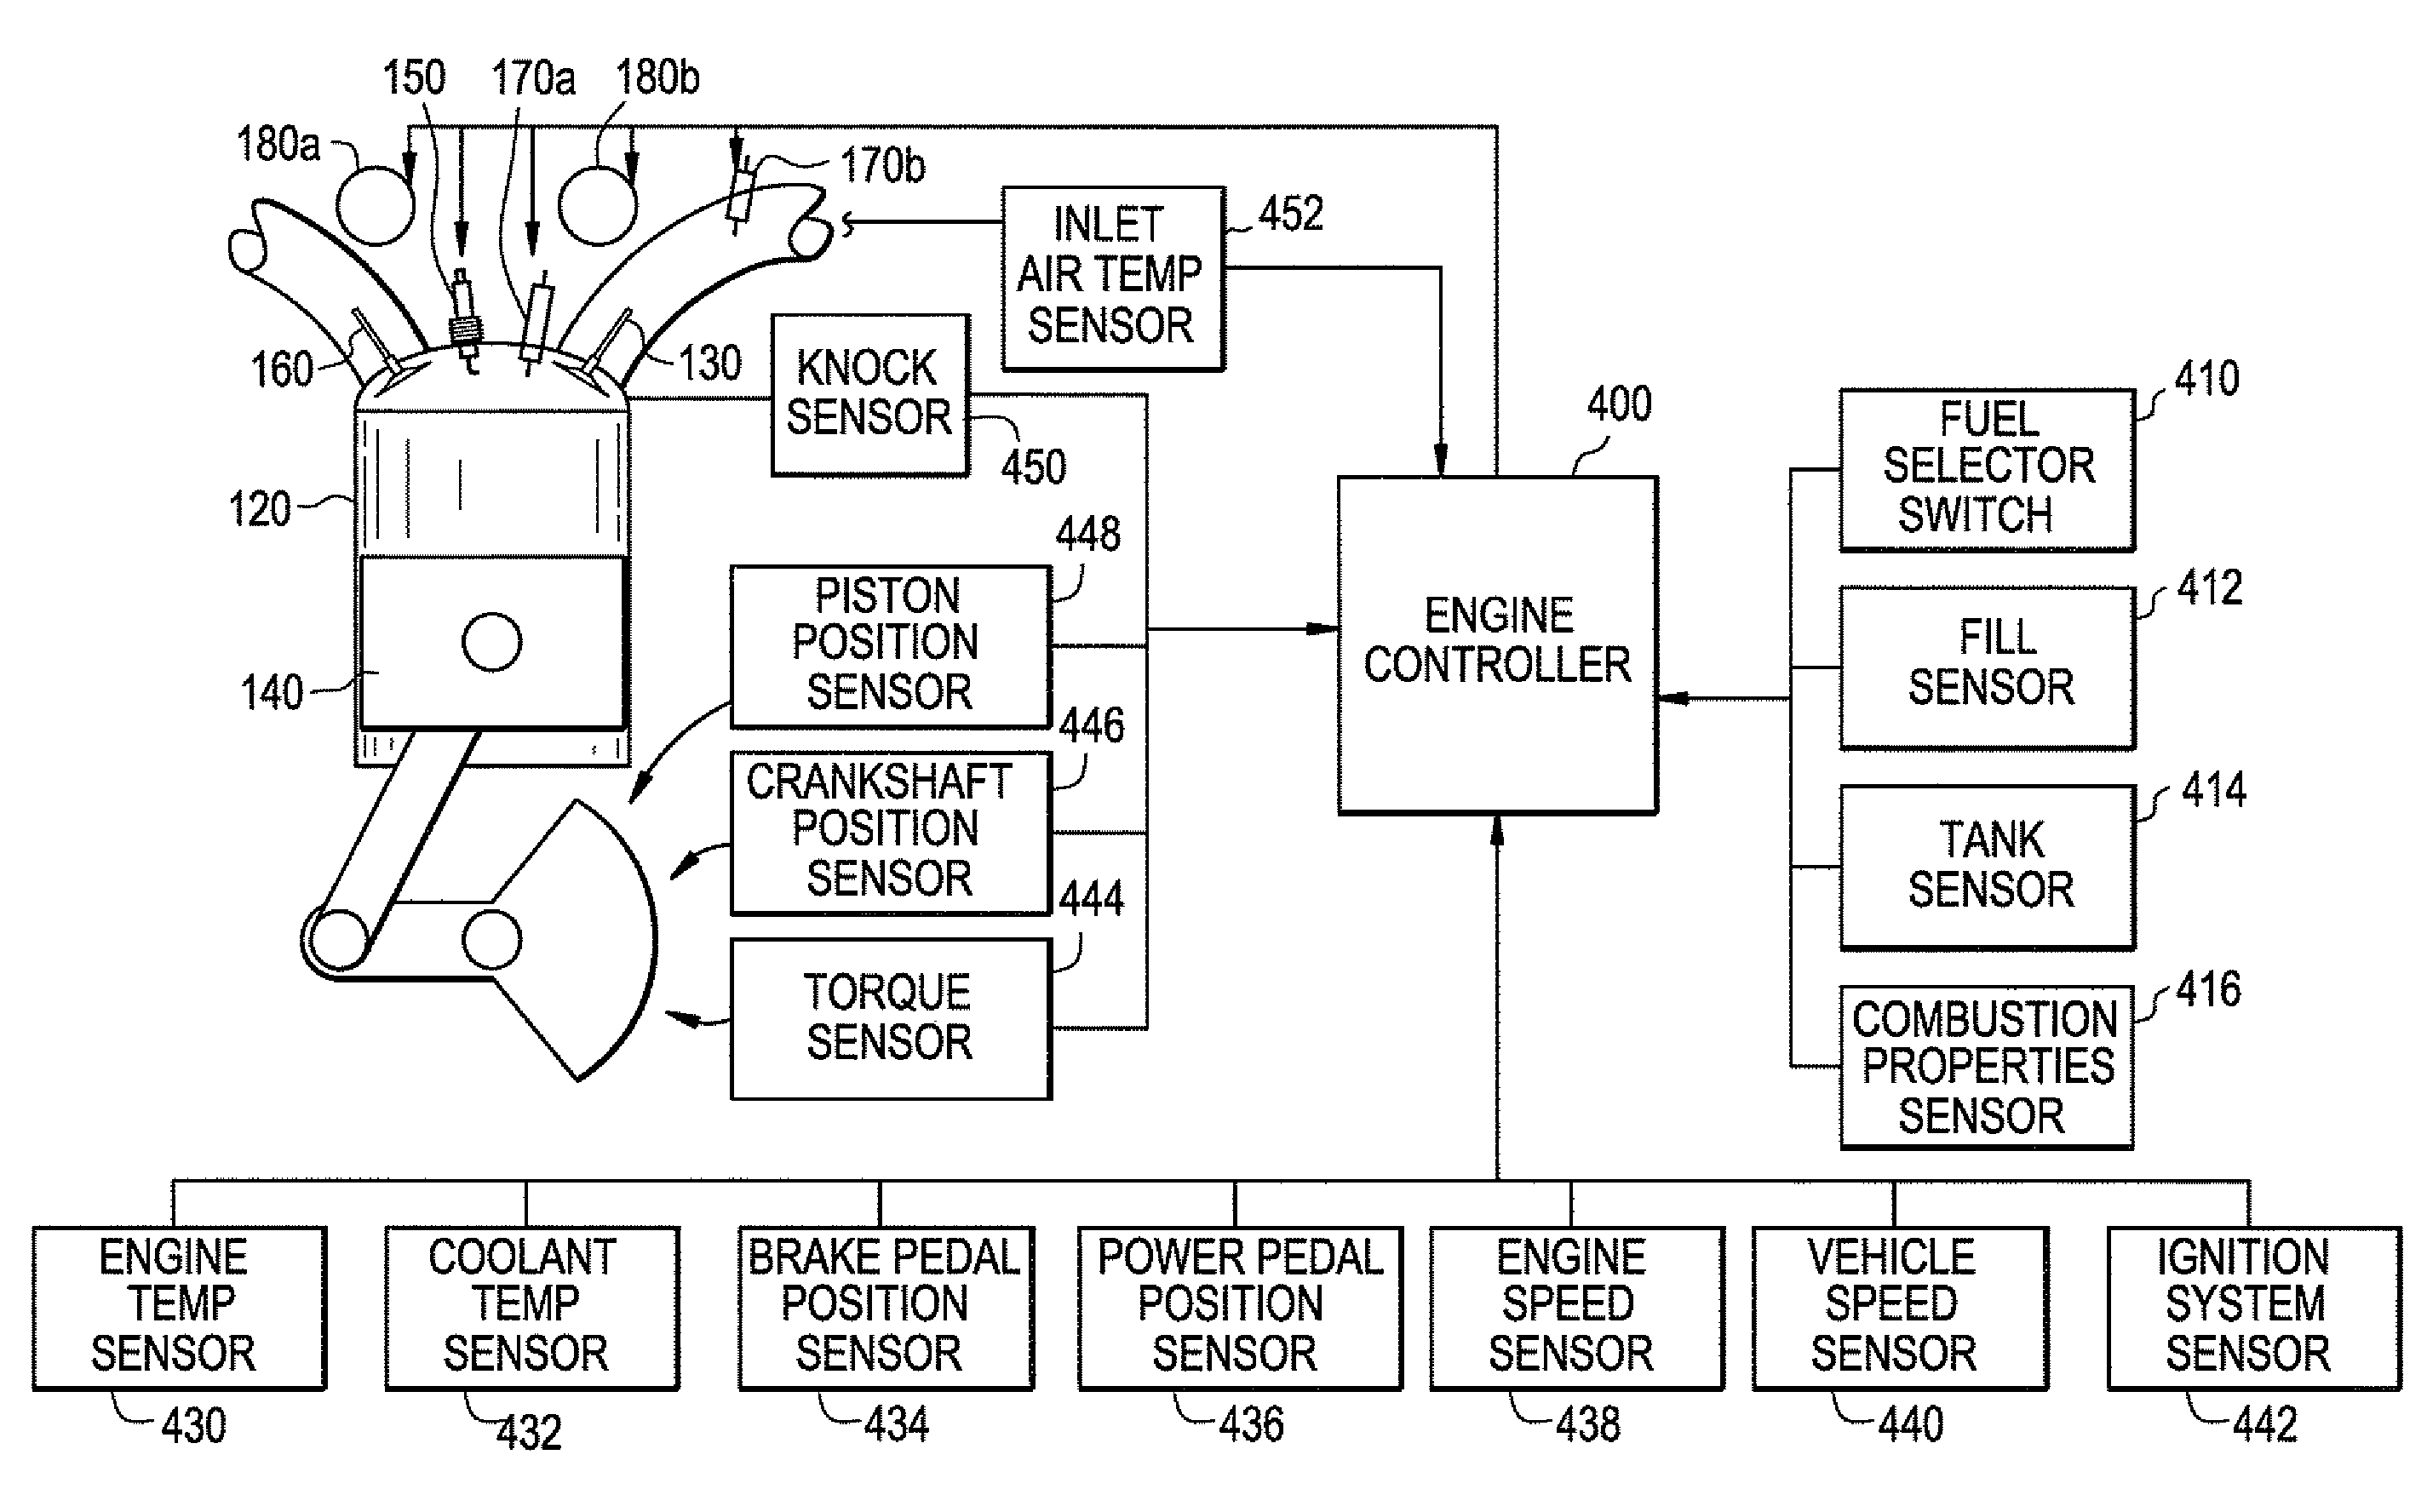 Adaptive miller cycle engine